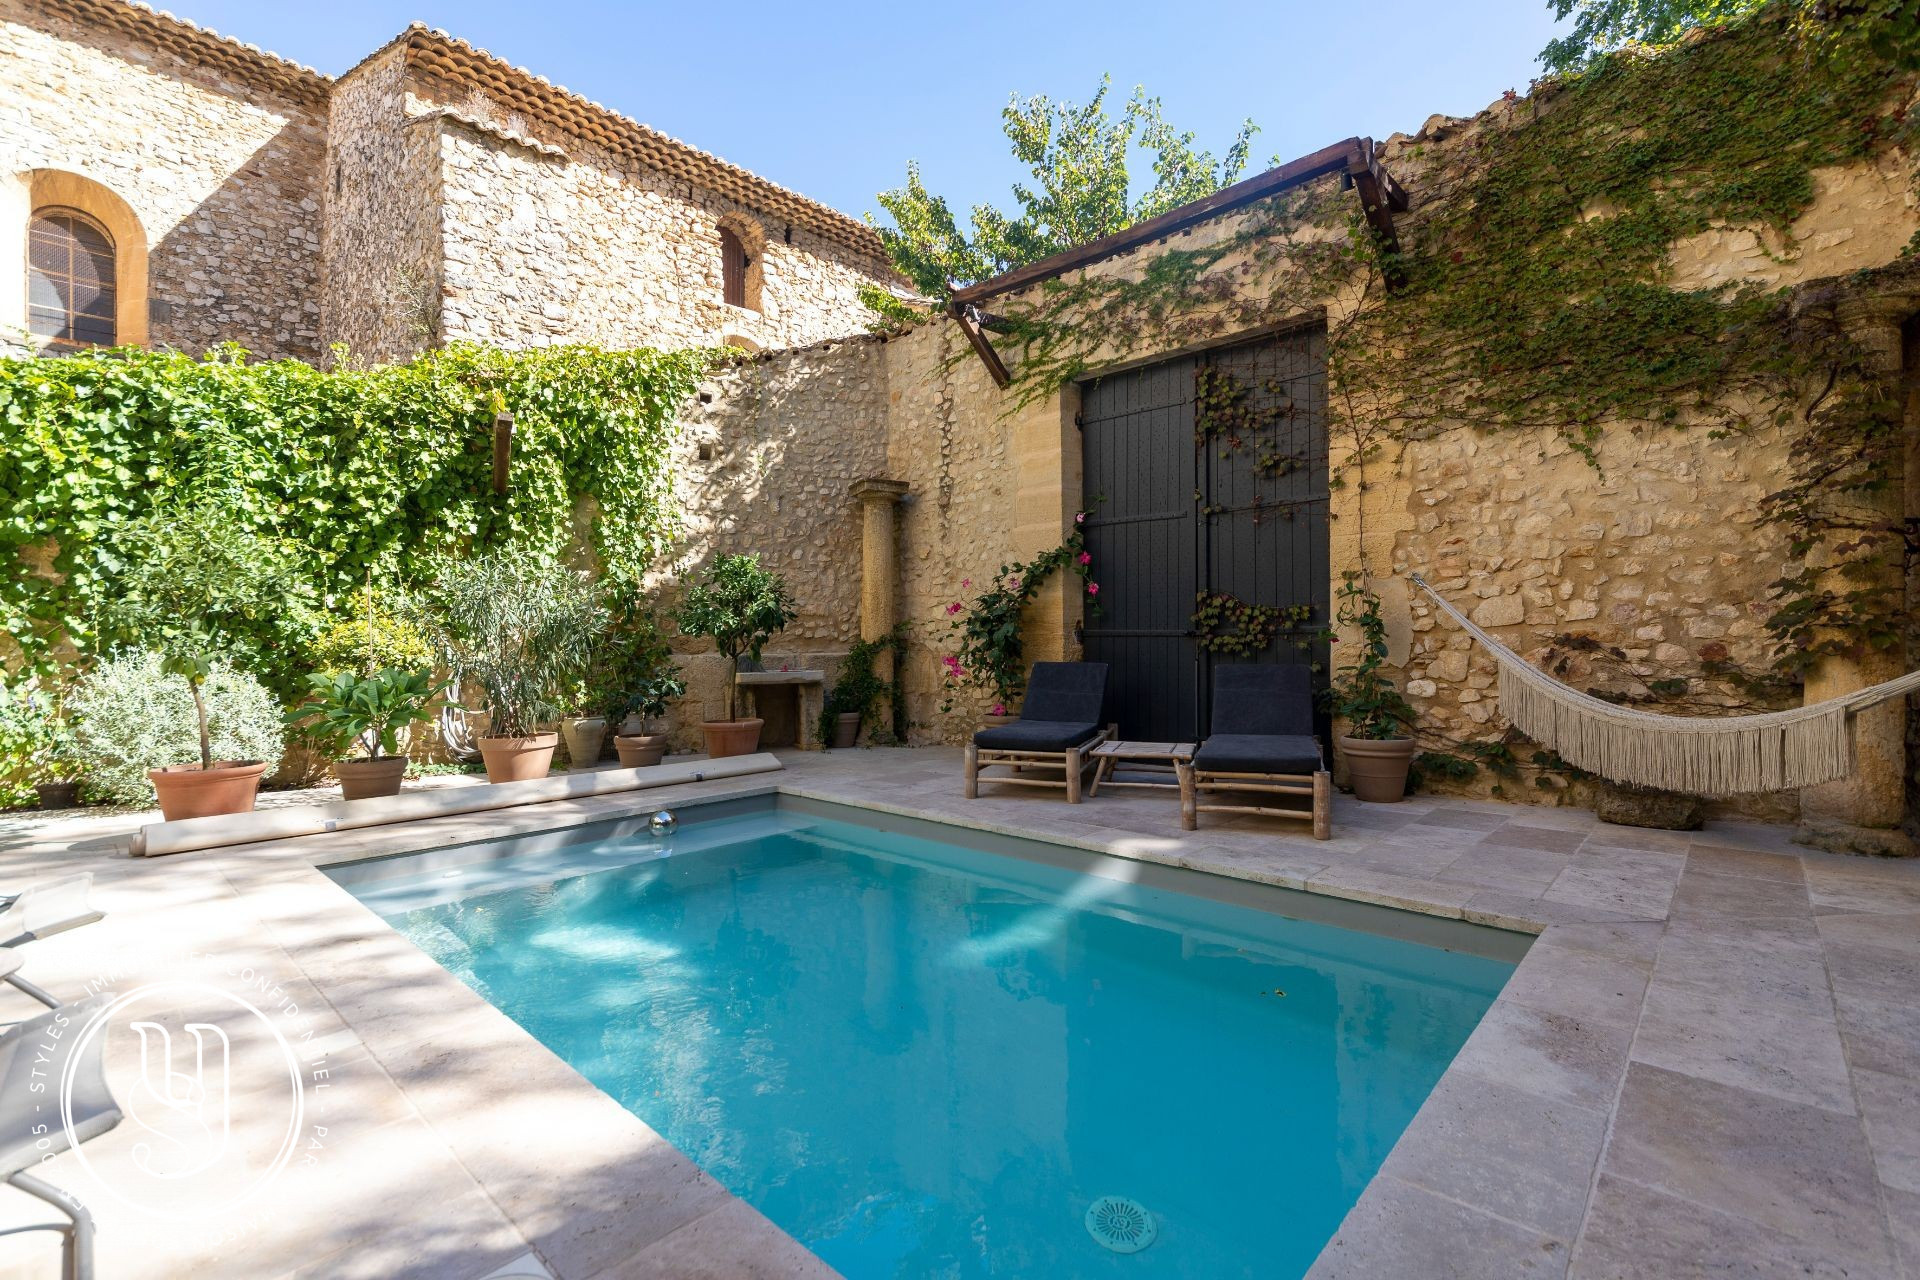 Uzes - surroundings, sold by S T Y LE S, a beautiful, refined and ele - image 3